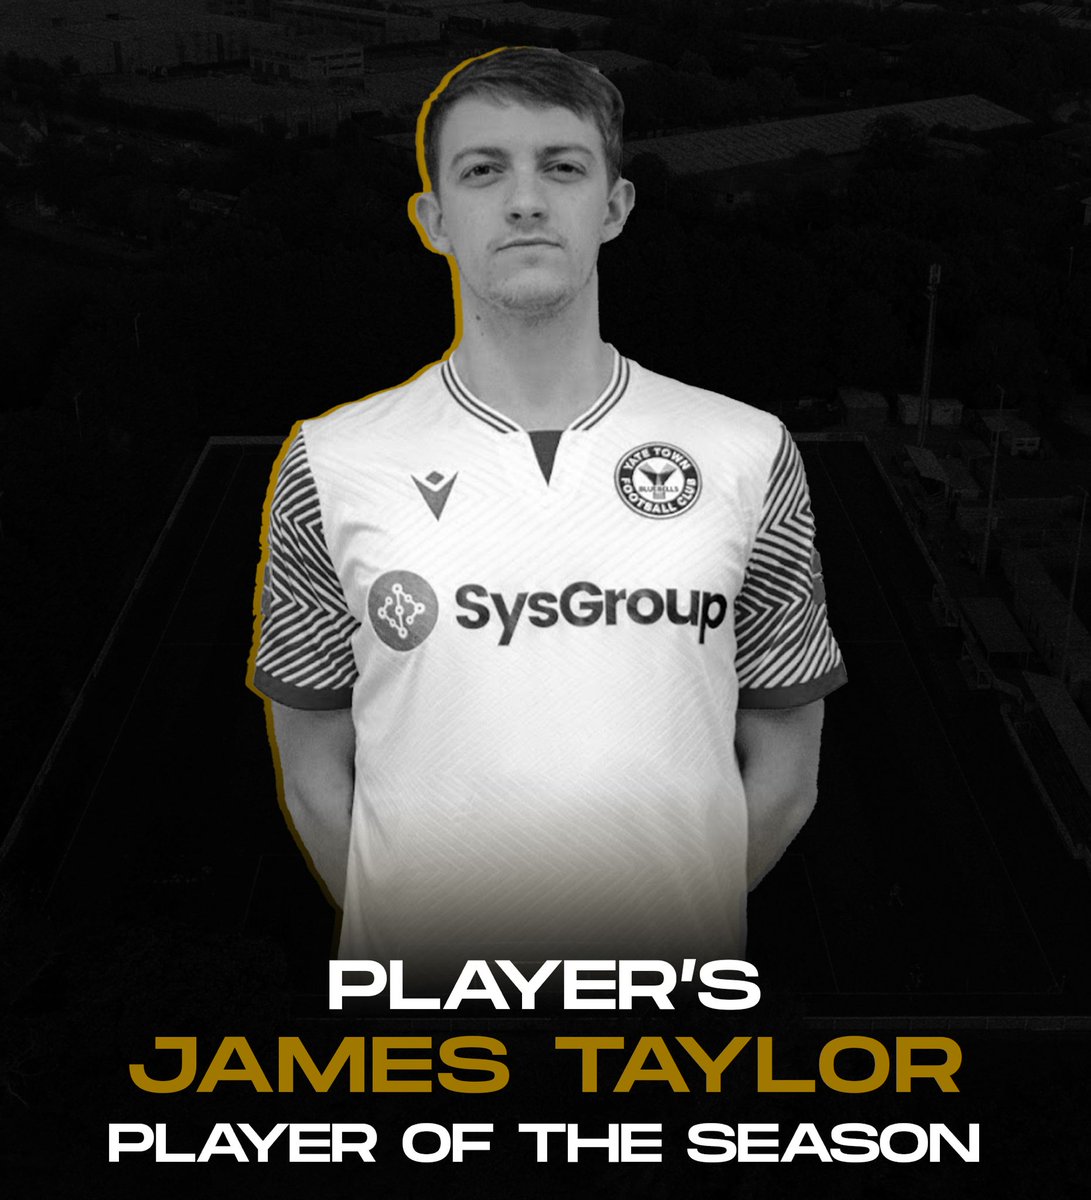 The Player's Player of the Year voted by all the players is James Taylor.

He signed in January, and he's been a revelation down the right side 🫡